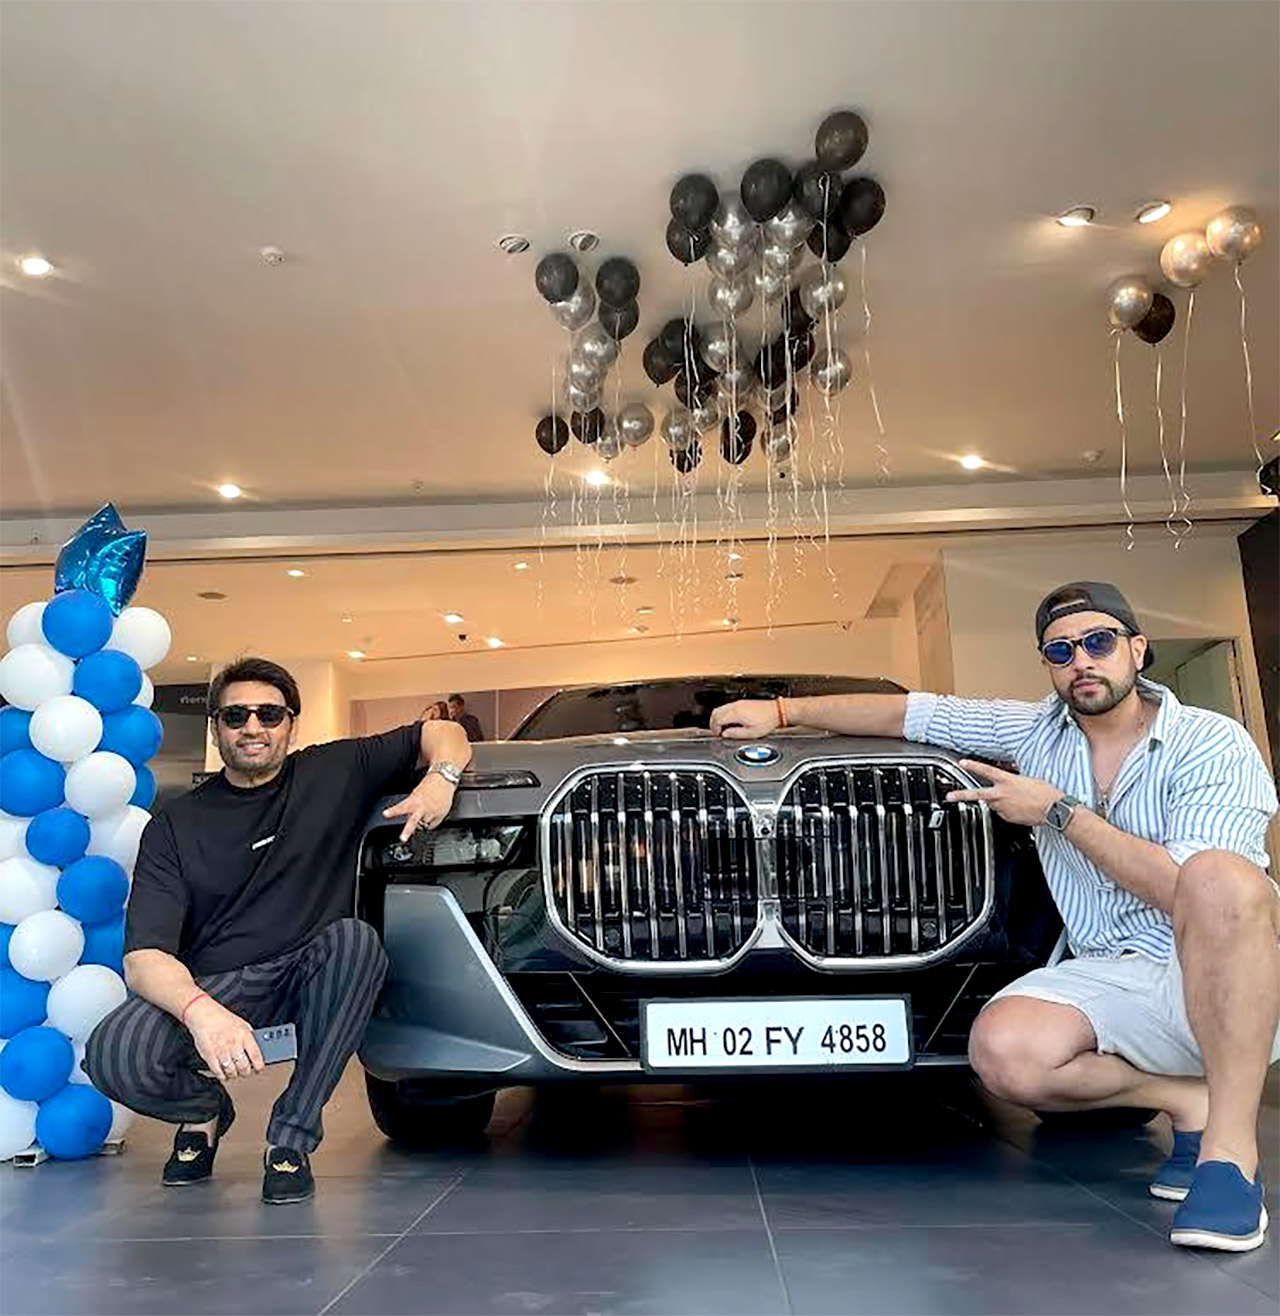 Shekhar Suman gifts wife a swanky BMWi7 worth Rs. 2.4 cr on their wedding anniversary; says, “My family should always have the best”